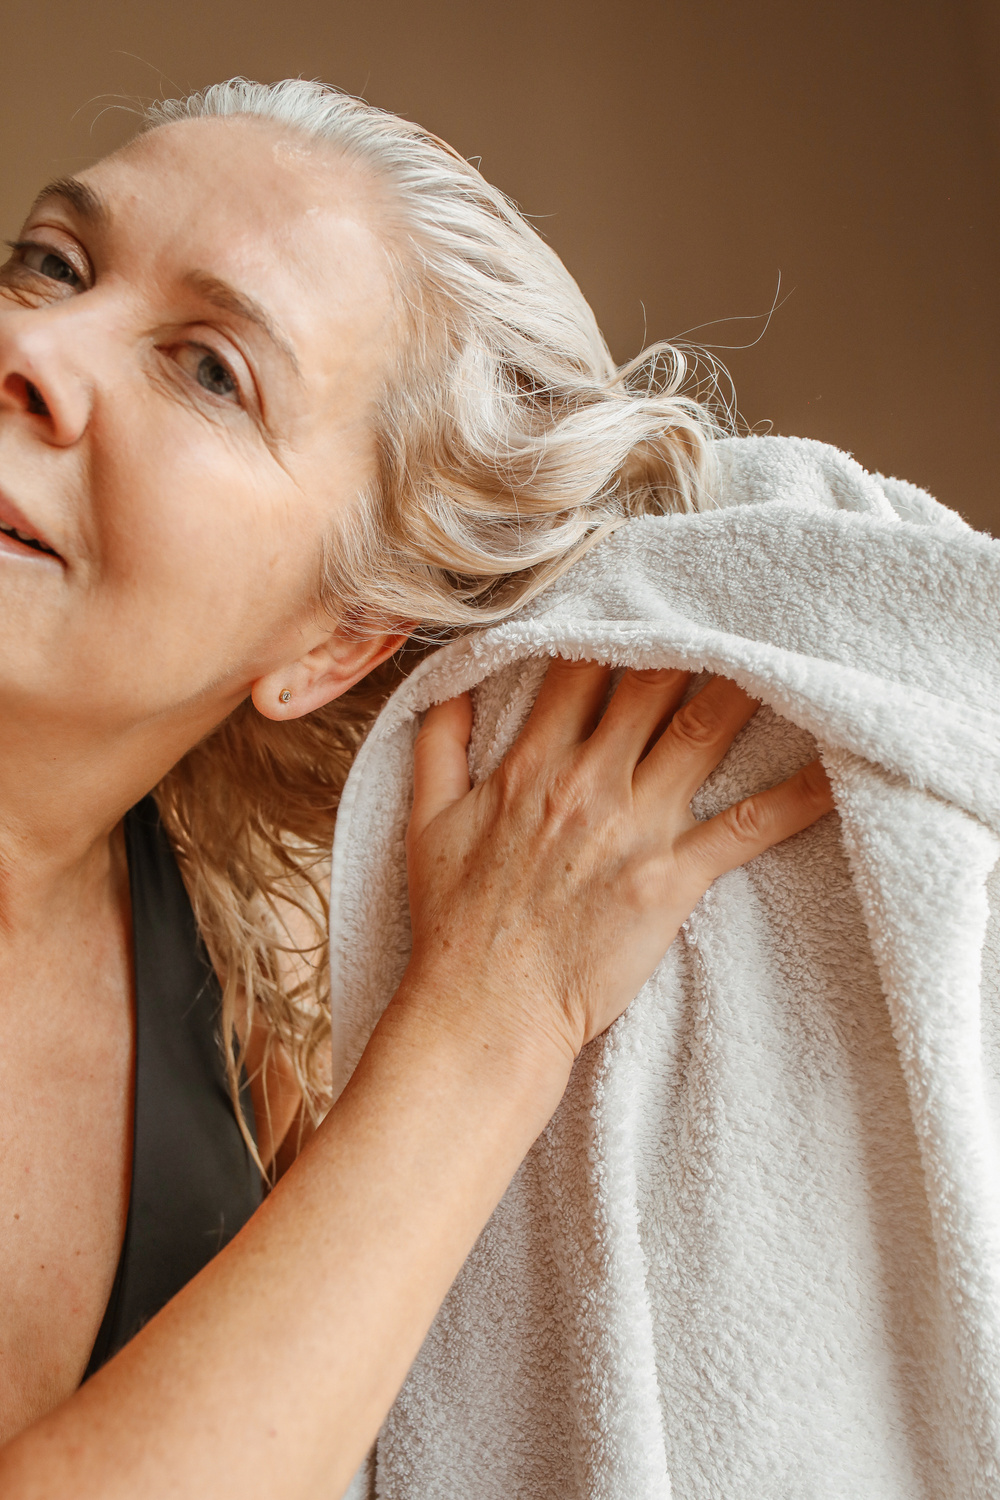 Elderly Woman Drying Her Hair with Towel